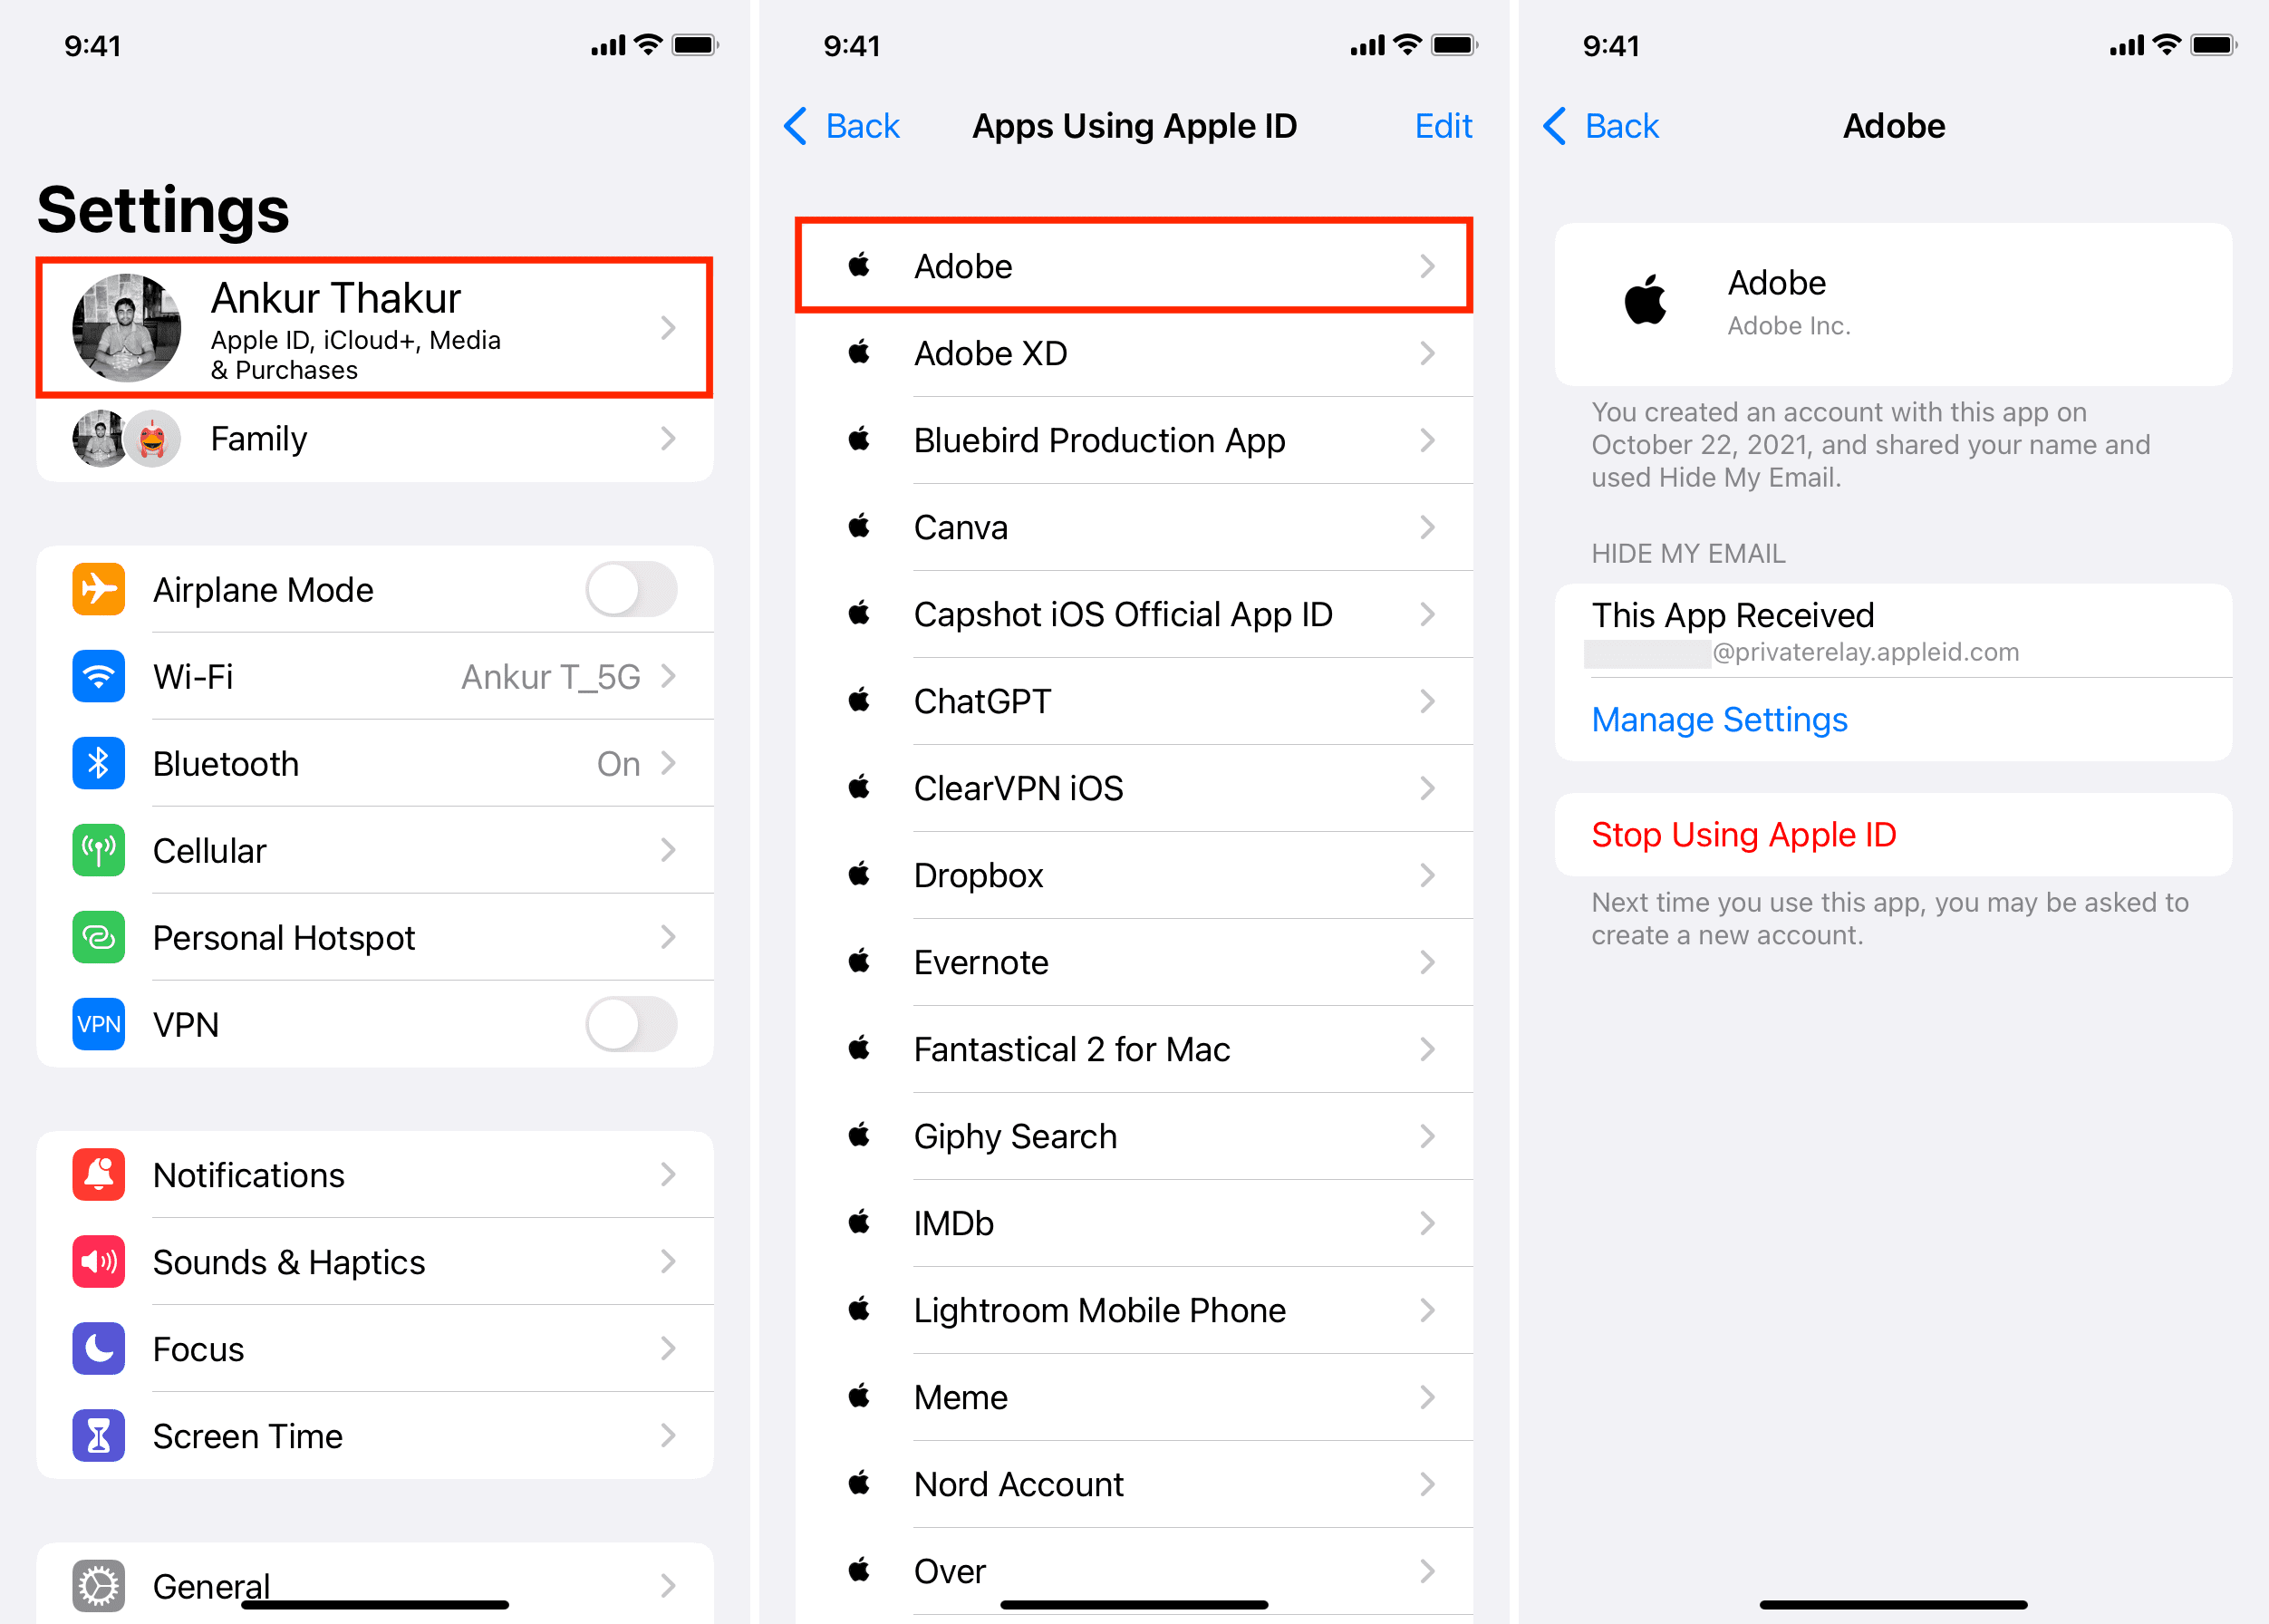 Apps Using Apple ID listed in iPhone Settings